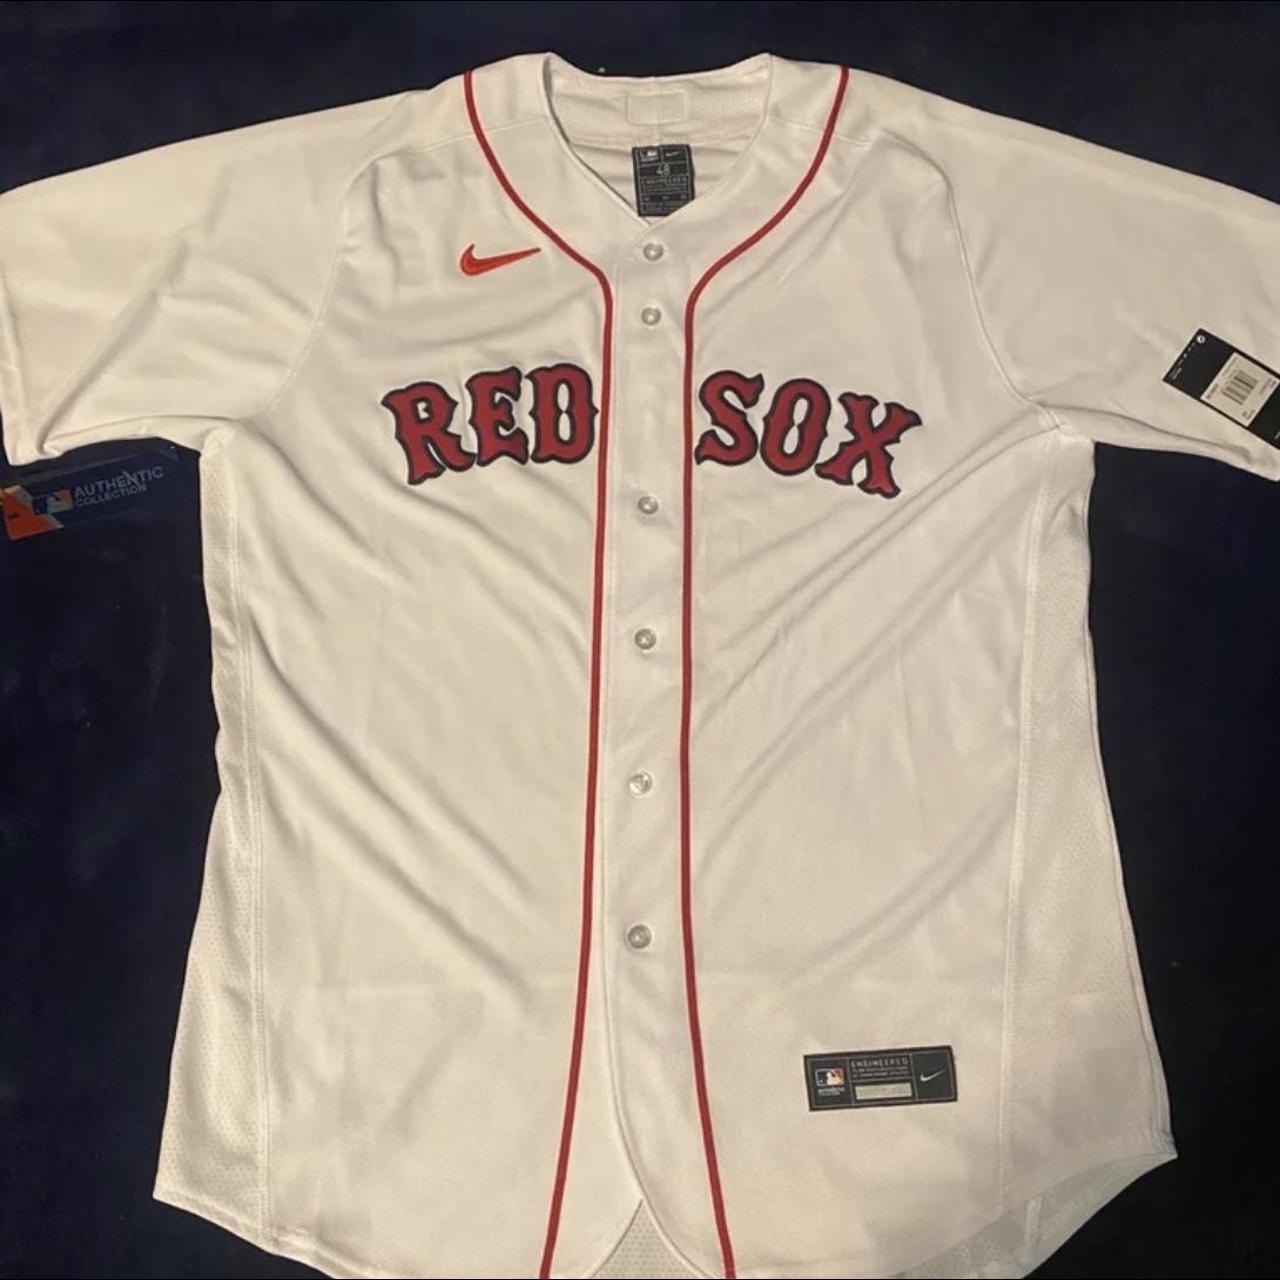 Boston Red Sox Nike Home Authentic Team Jersey - White